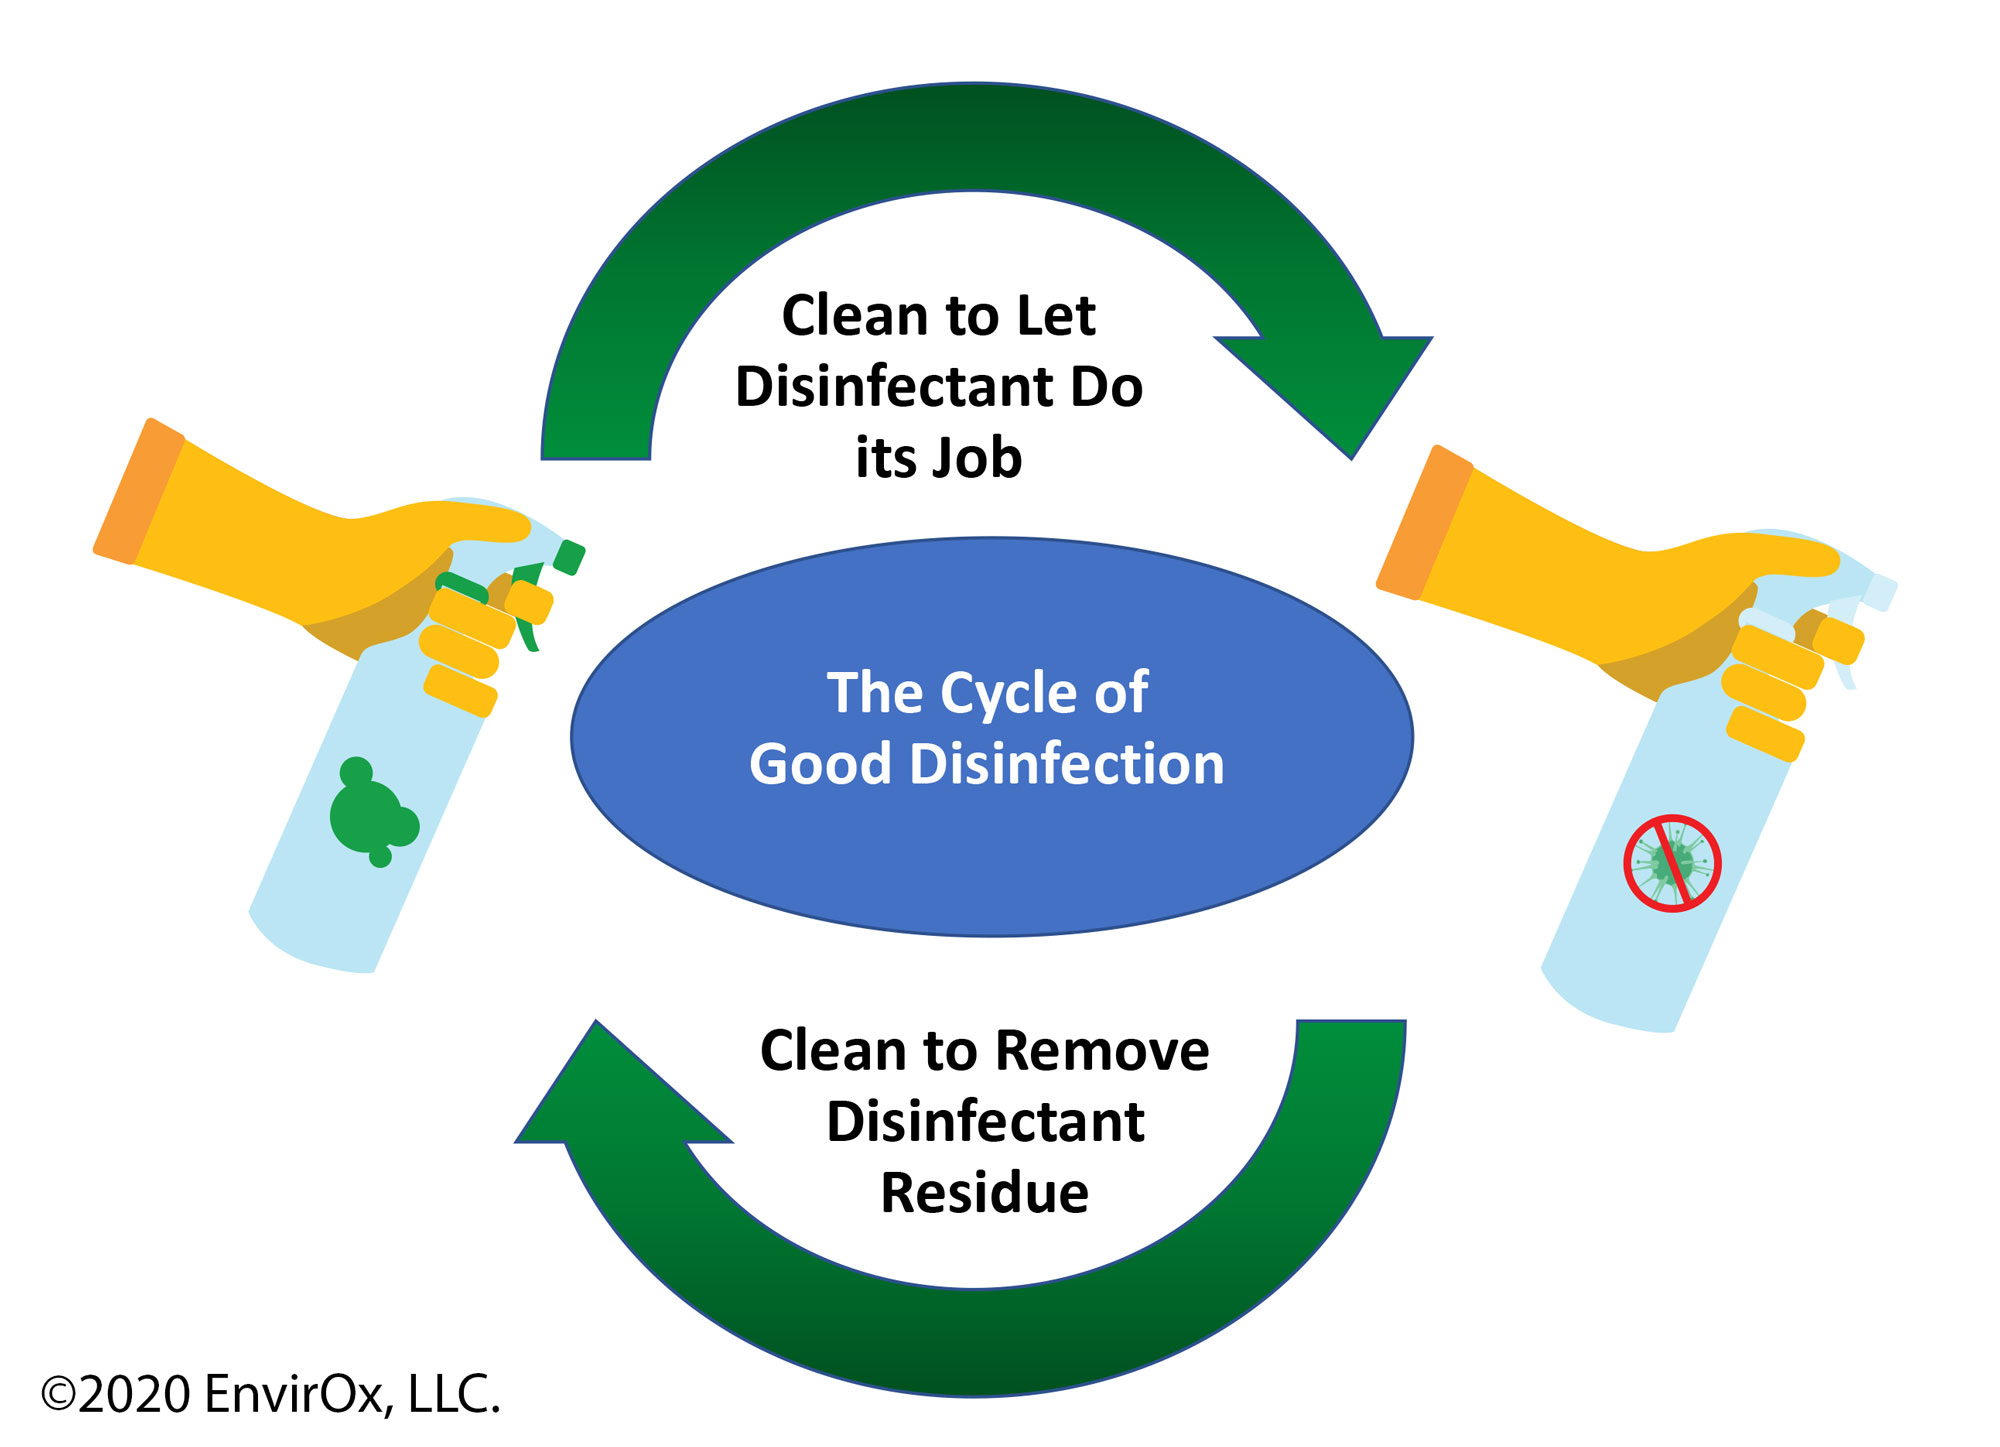 They Cycle of Disinfection